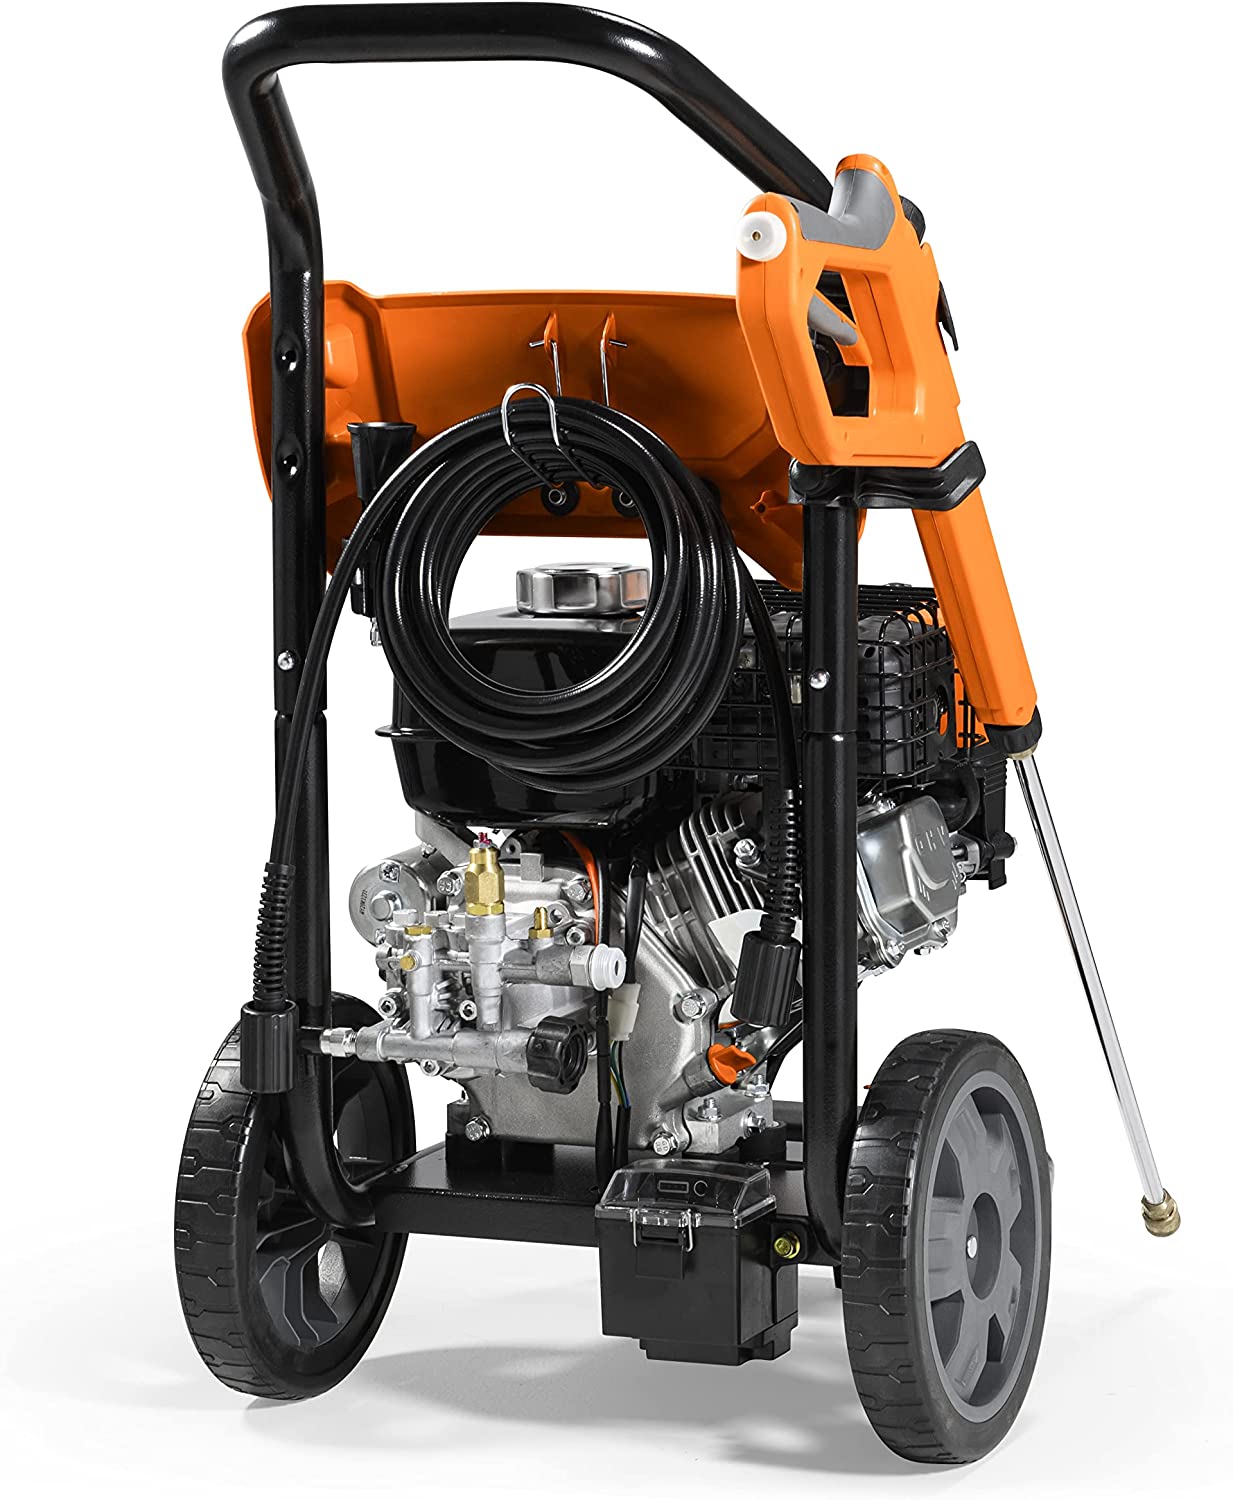 Generac 3100 PSI 2.5 GPM Electric Start Gas Pressure Washer Kit with Attachments 8895 New